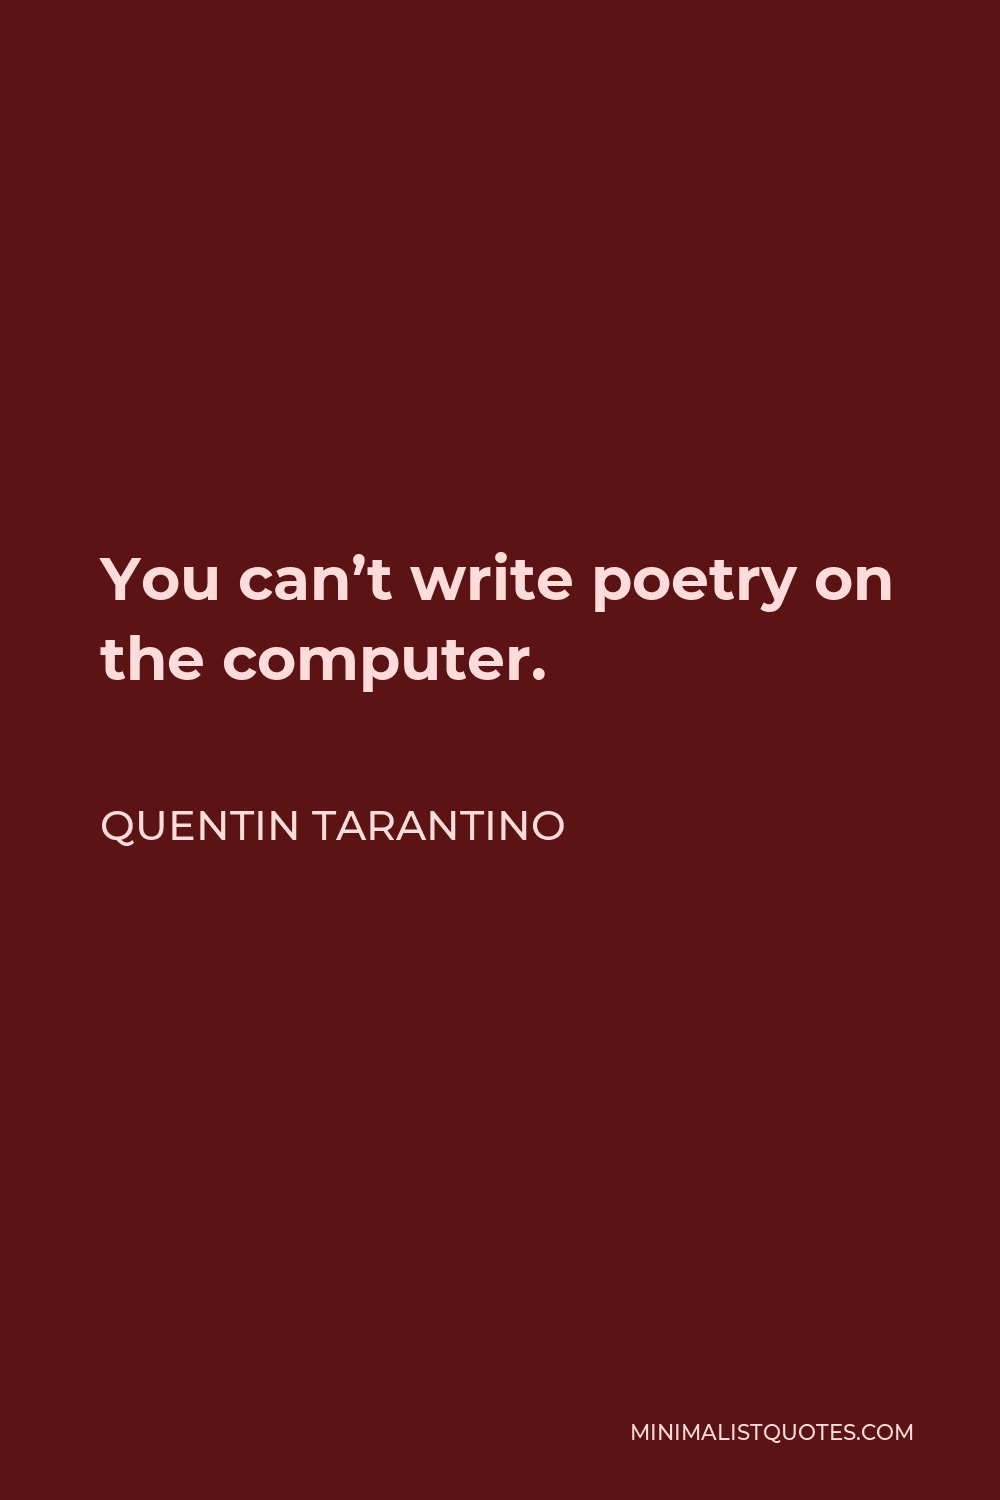 Quentin Tarantino Quote - You can’t write poetry on the computer.